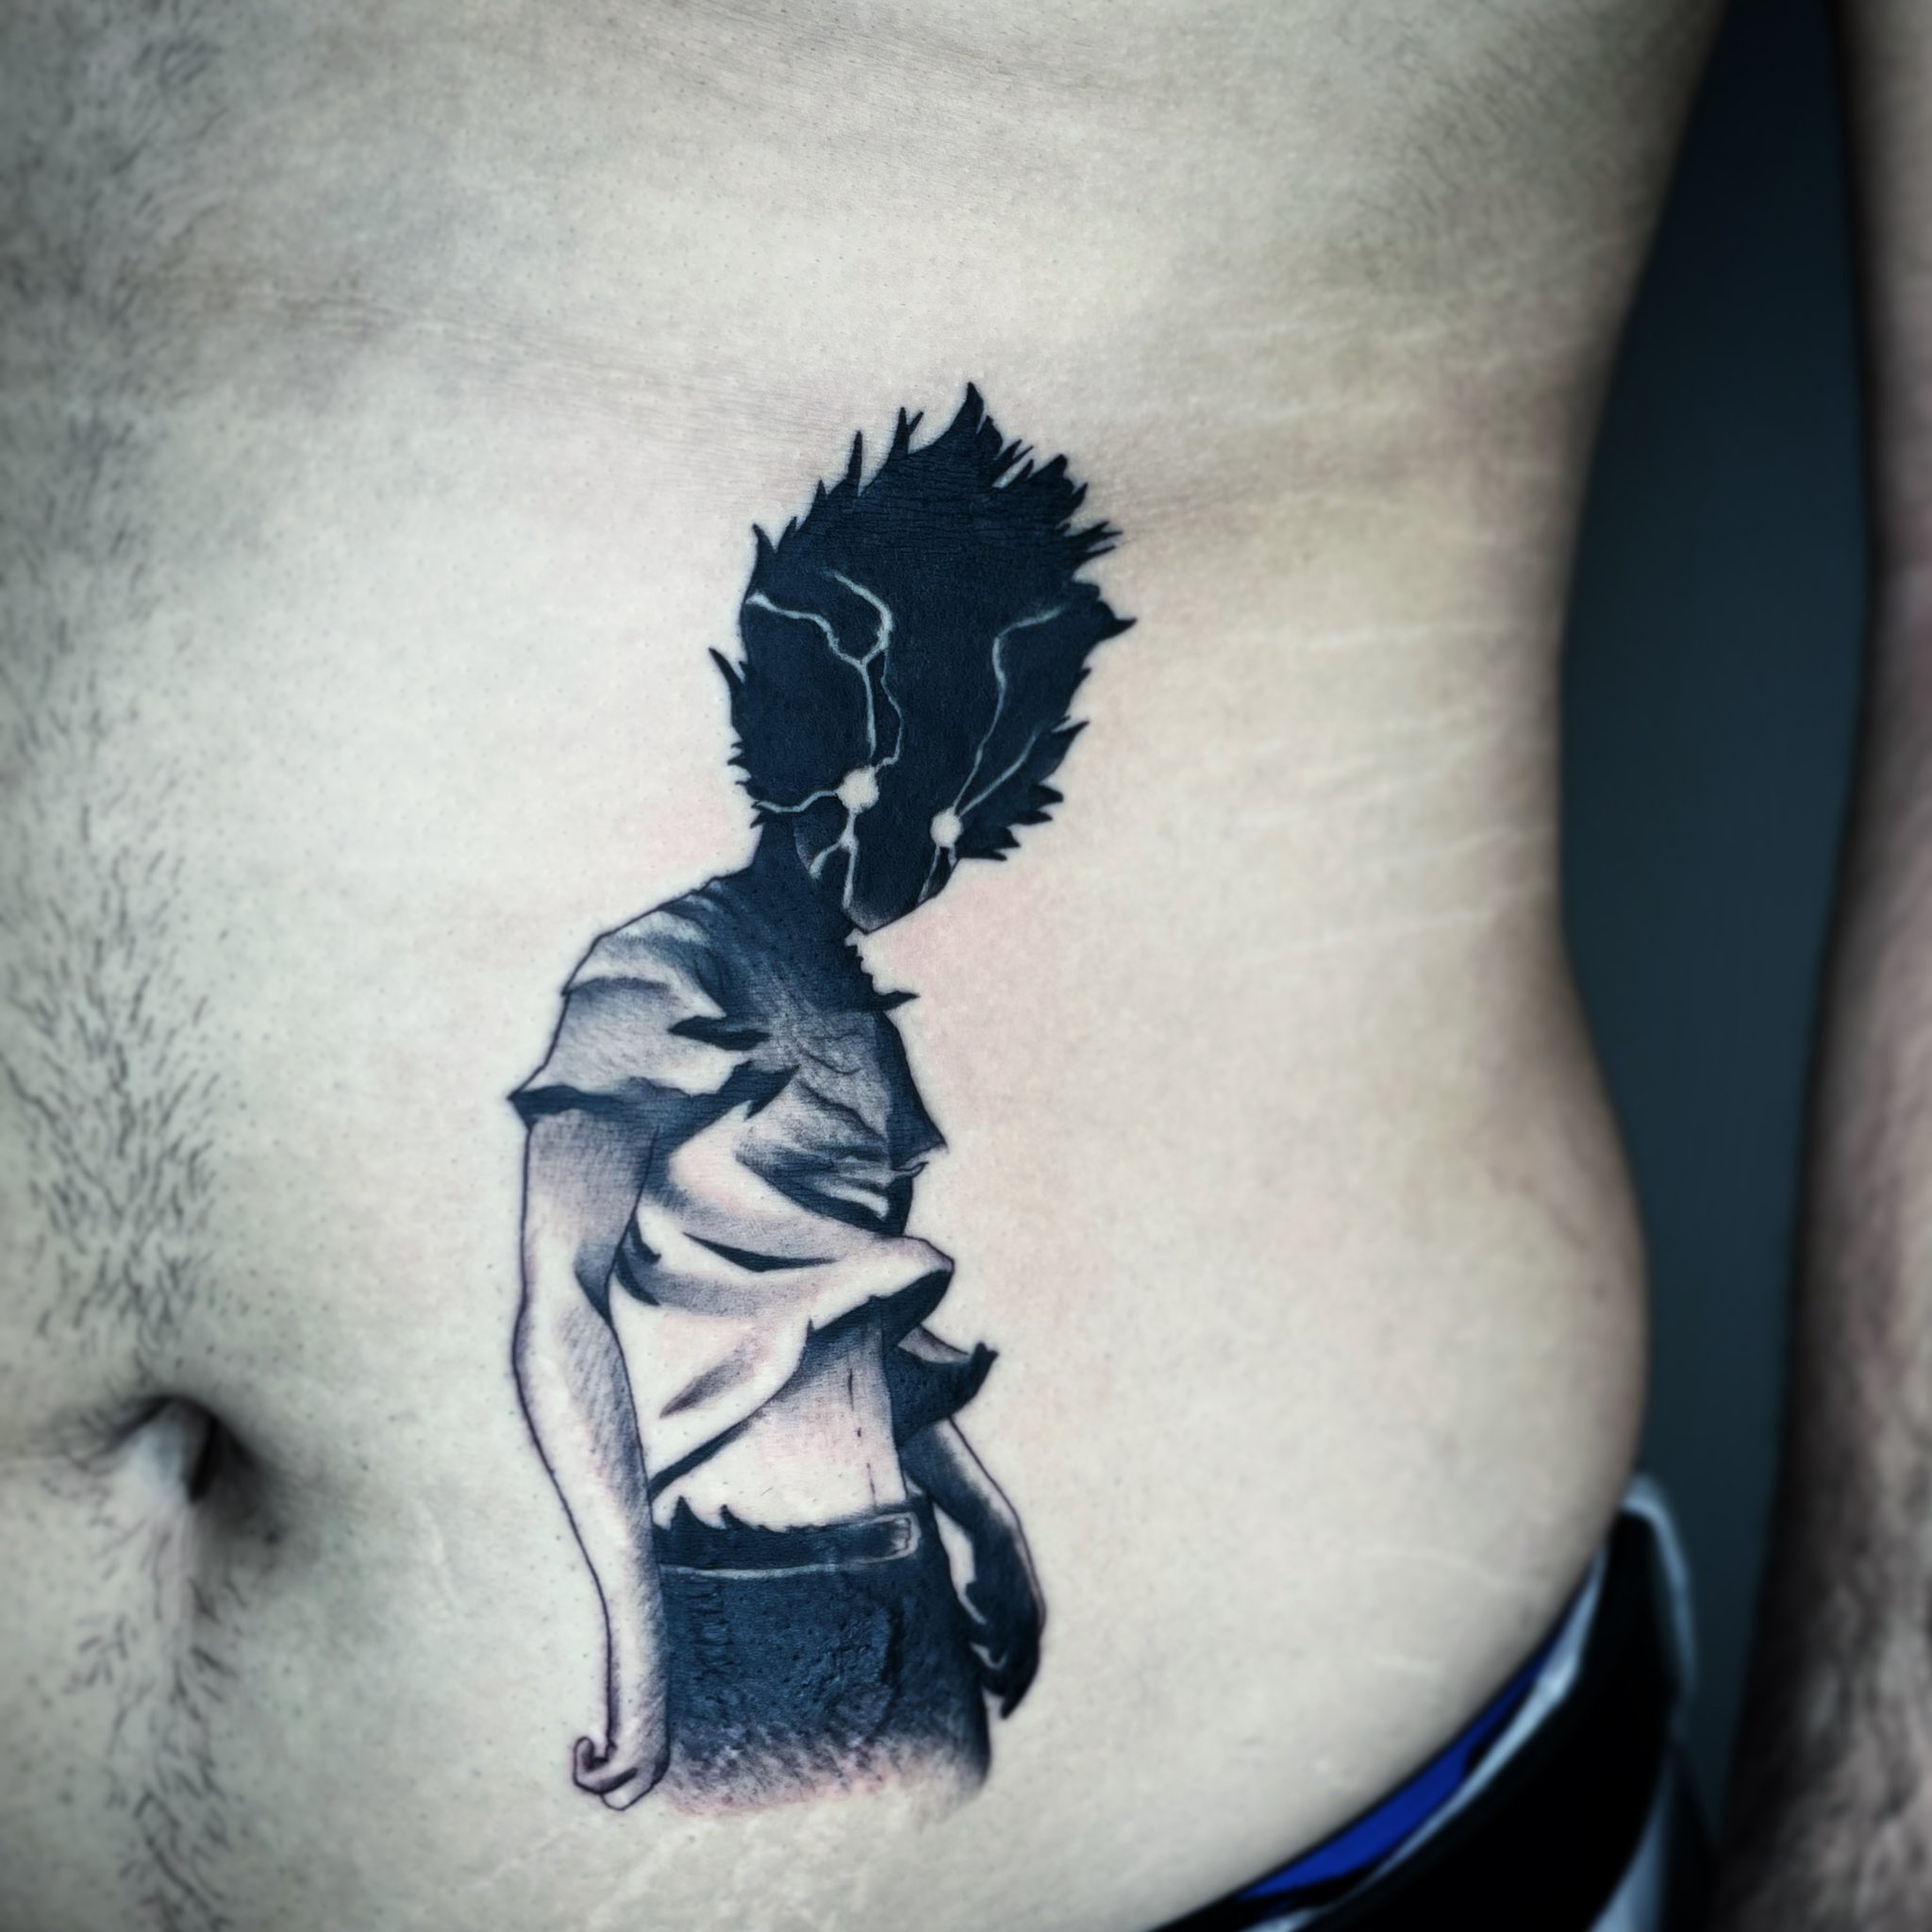 First reddit post ever Thought you guys might like my first professional  tattoo   rMobpsycho100